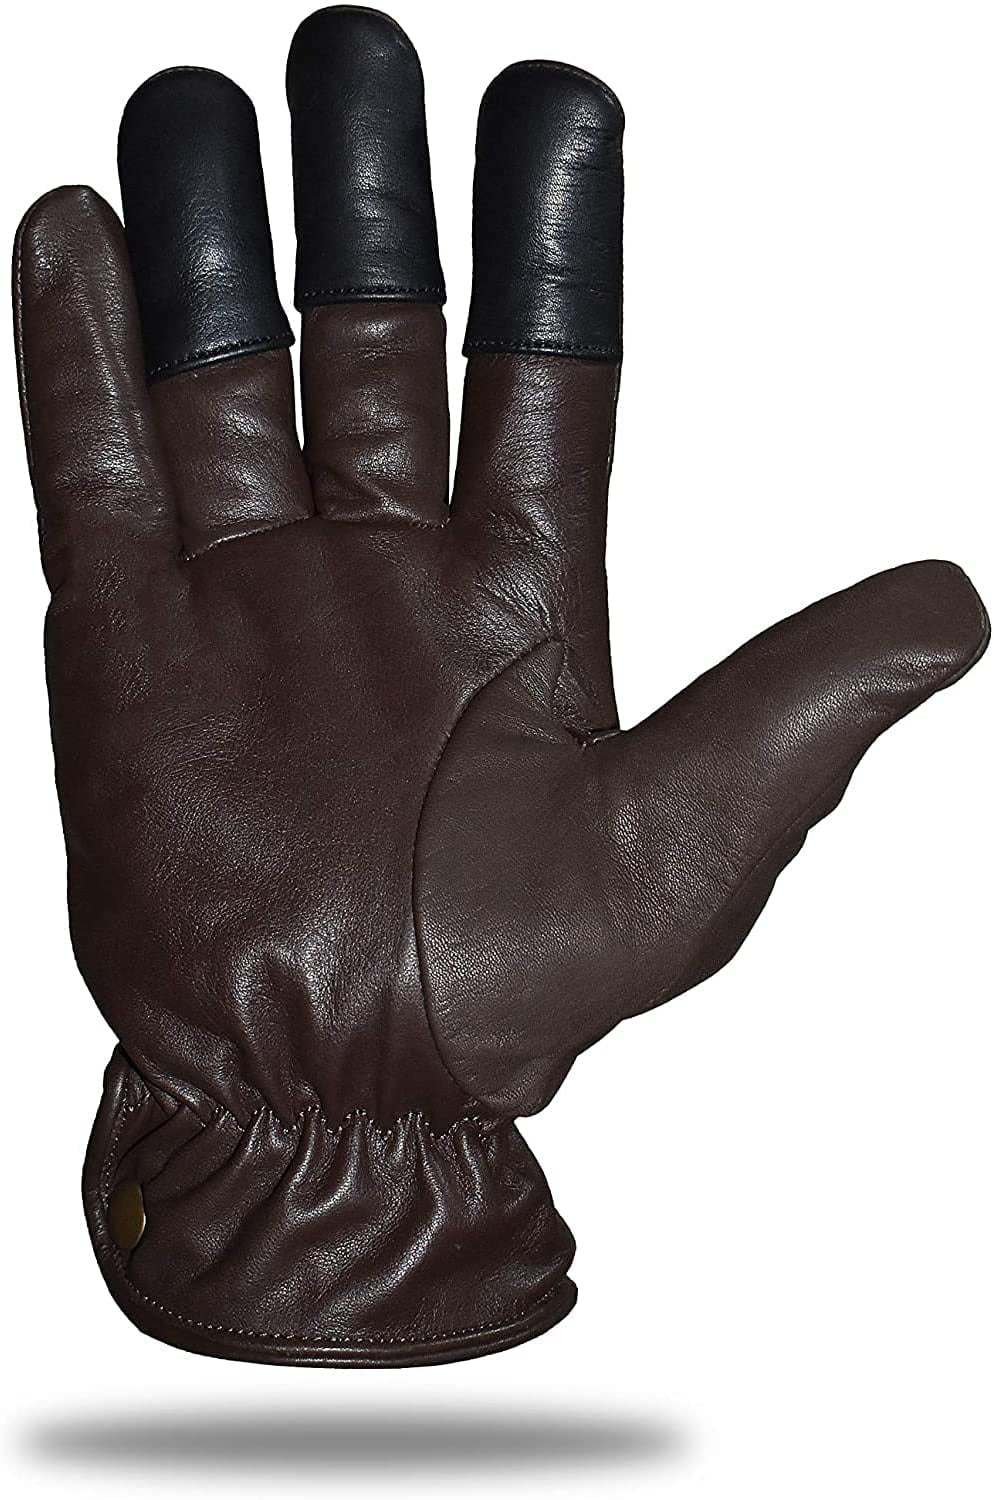 TRADITIONAL BOW SHOOTING LEATHER GLOVE TOP QUALITY GLOVE 100% REAL LEATHER 